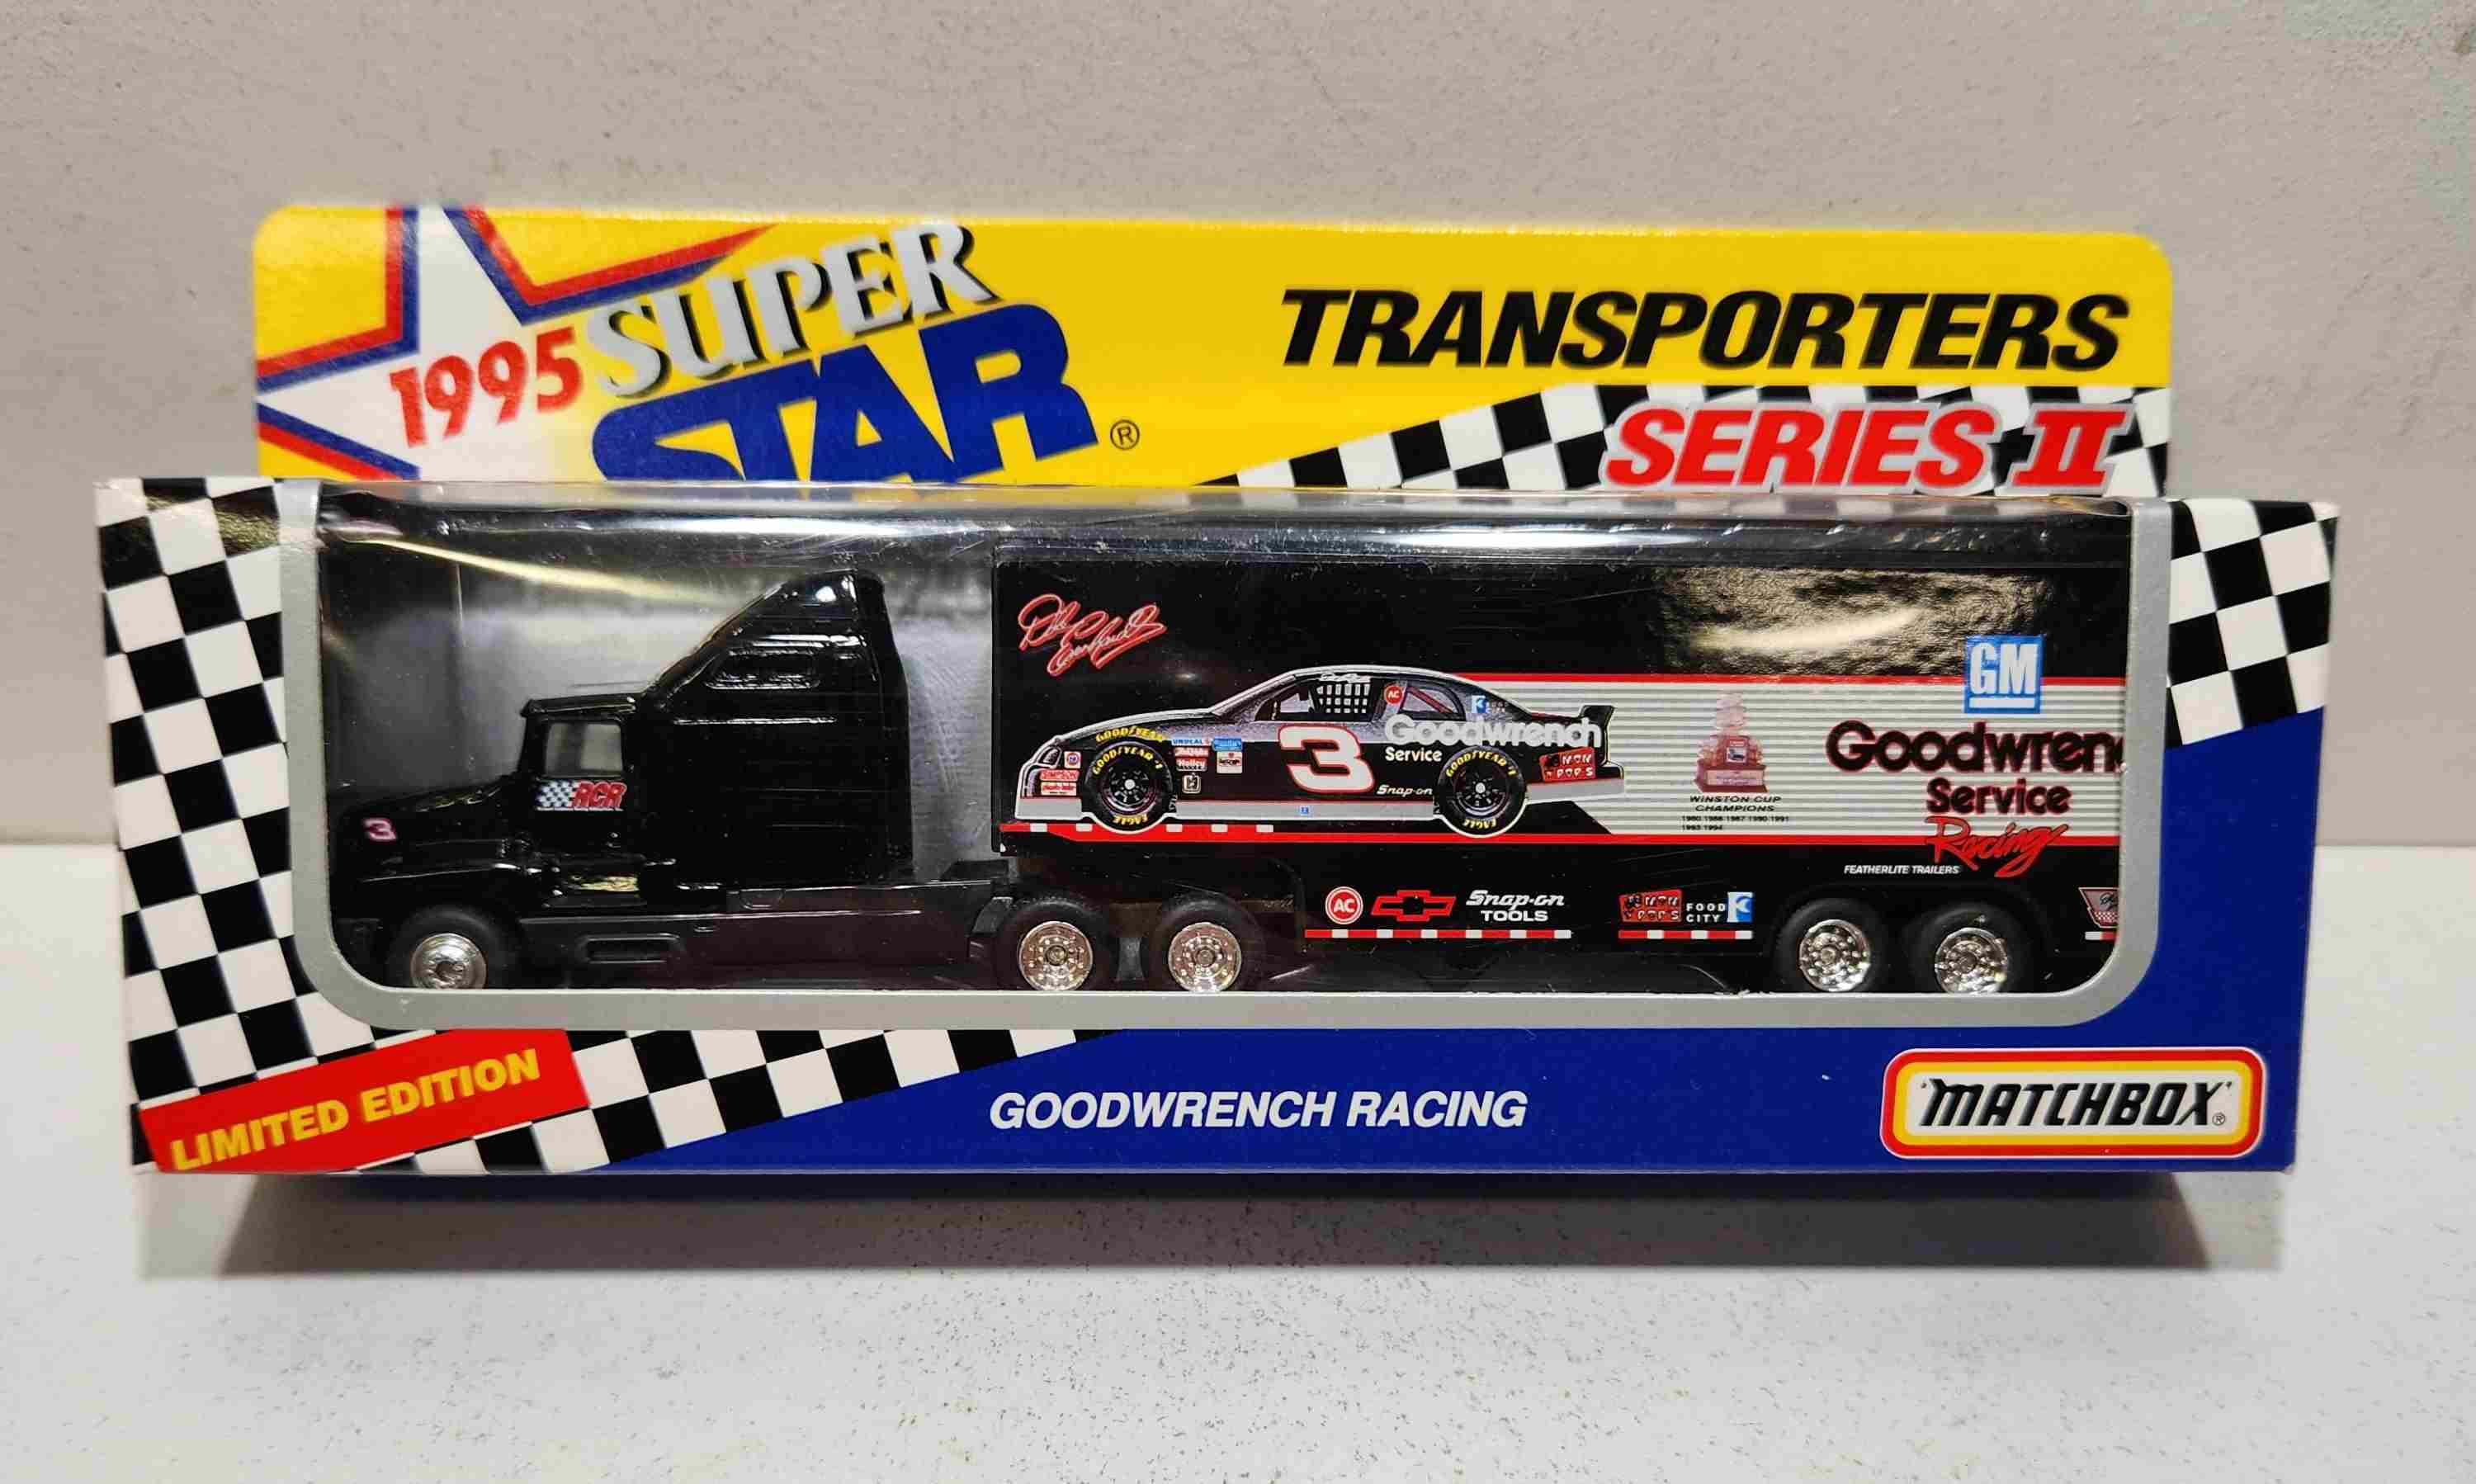 1995 Dale Earnhardt 1/80th Goodwrench Transporter